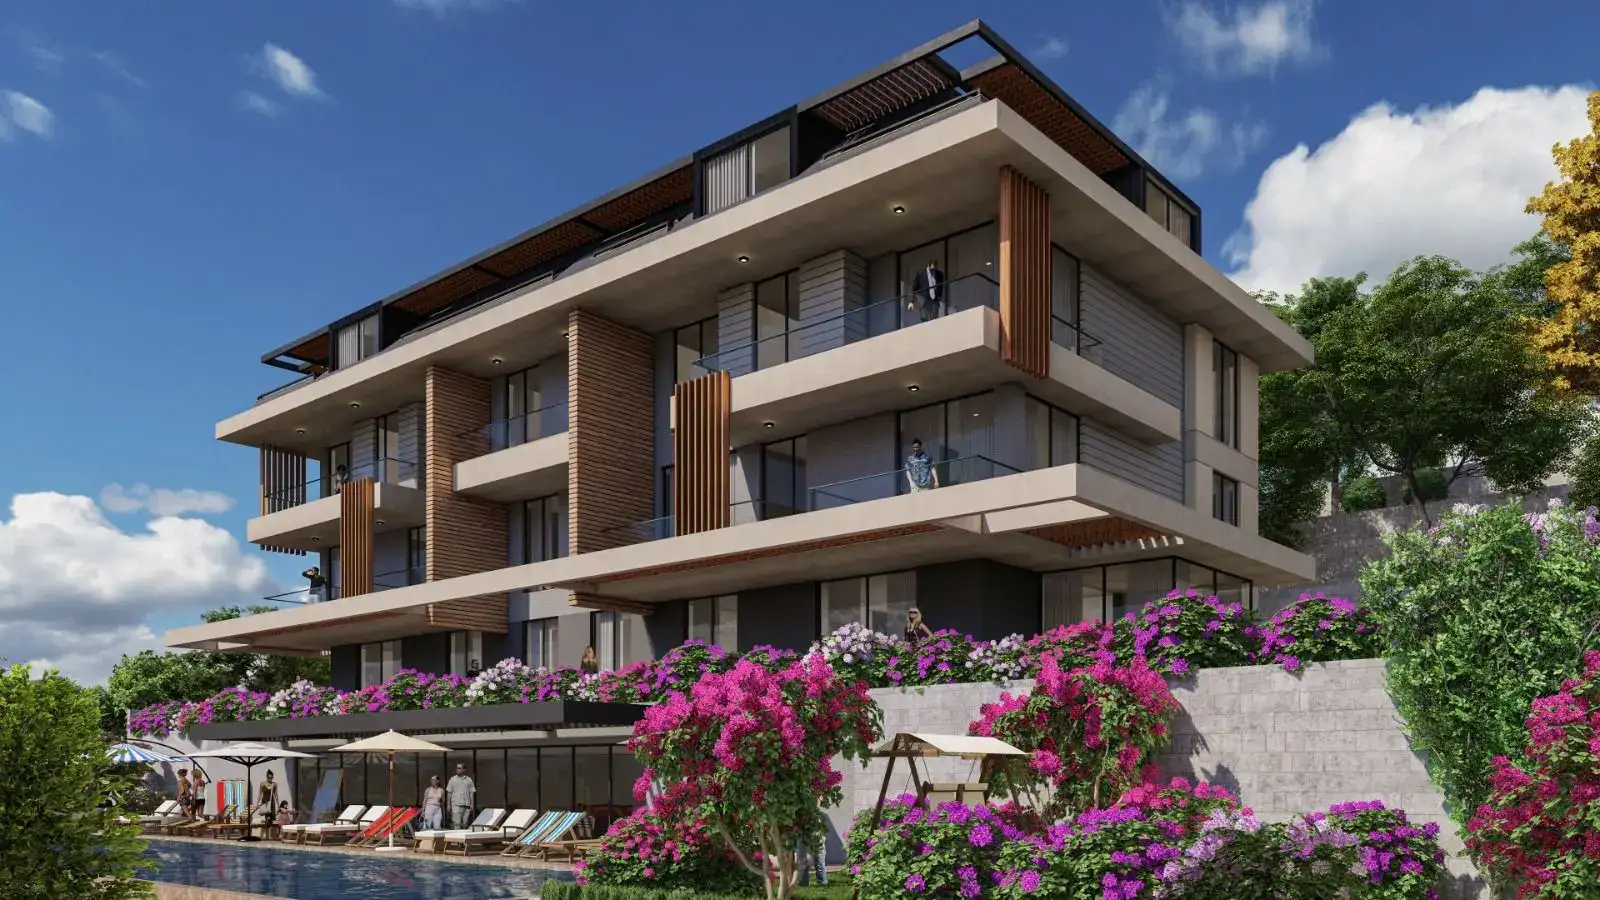 NEW CLUB RESIDENTIAL COMPLEX PROJECT WITH 11 APARTMENTS IN ALANYA